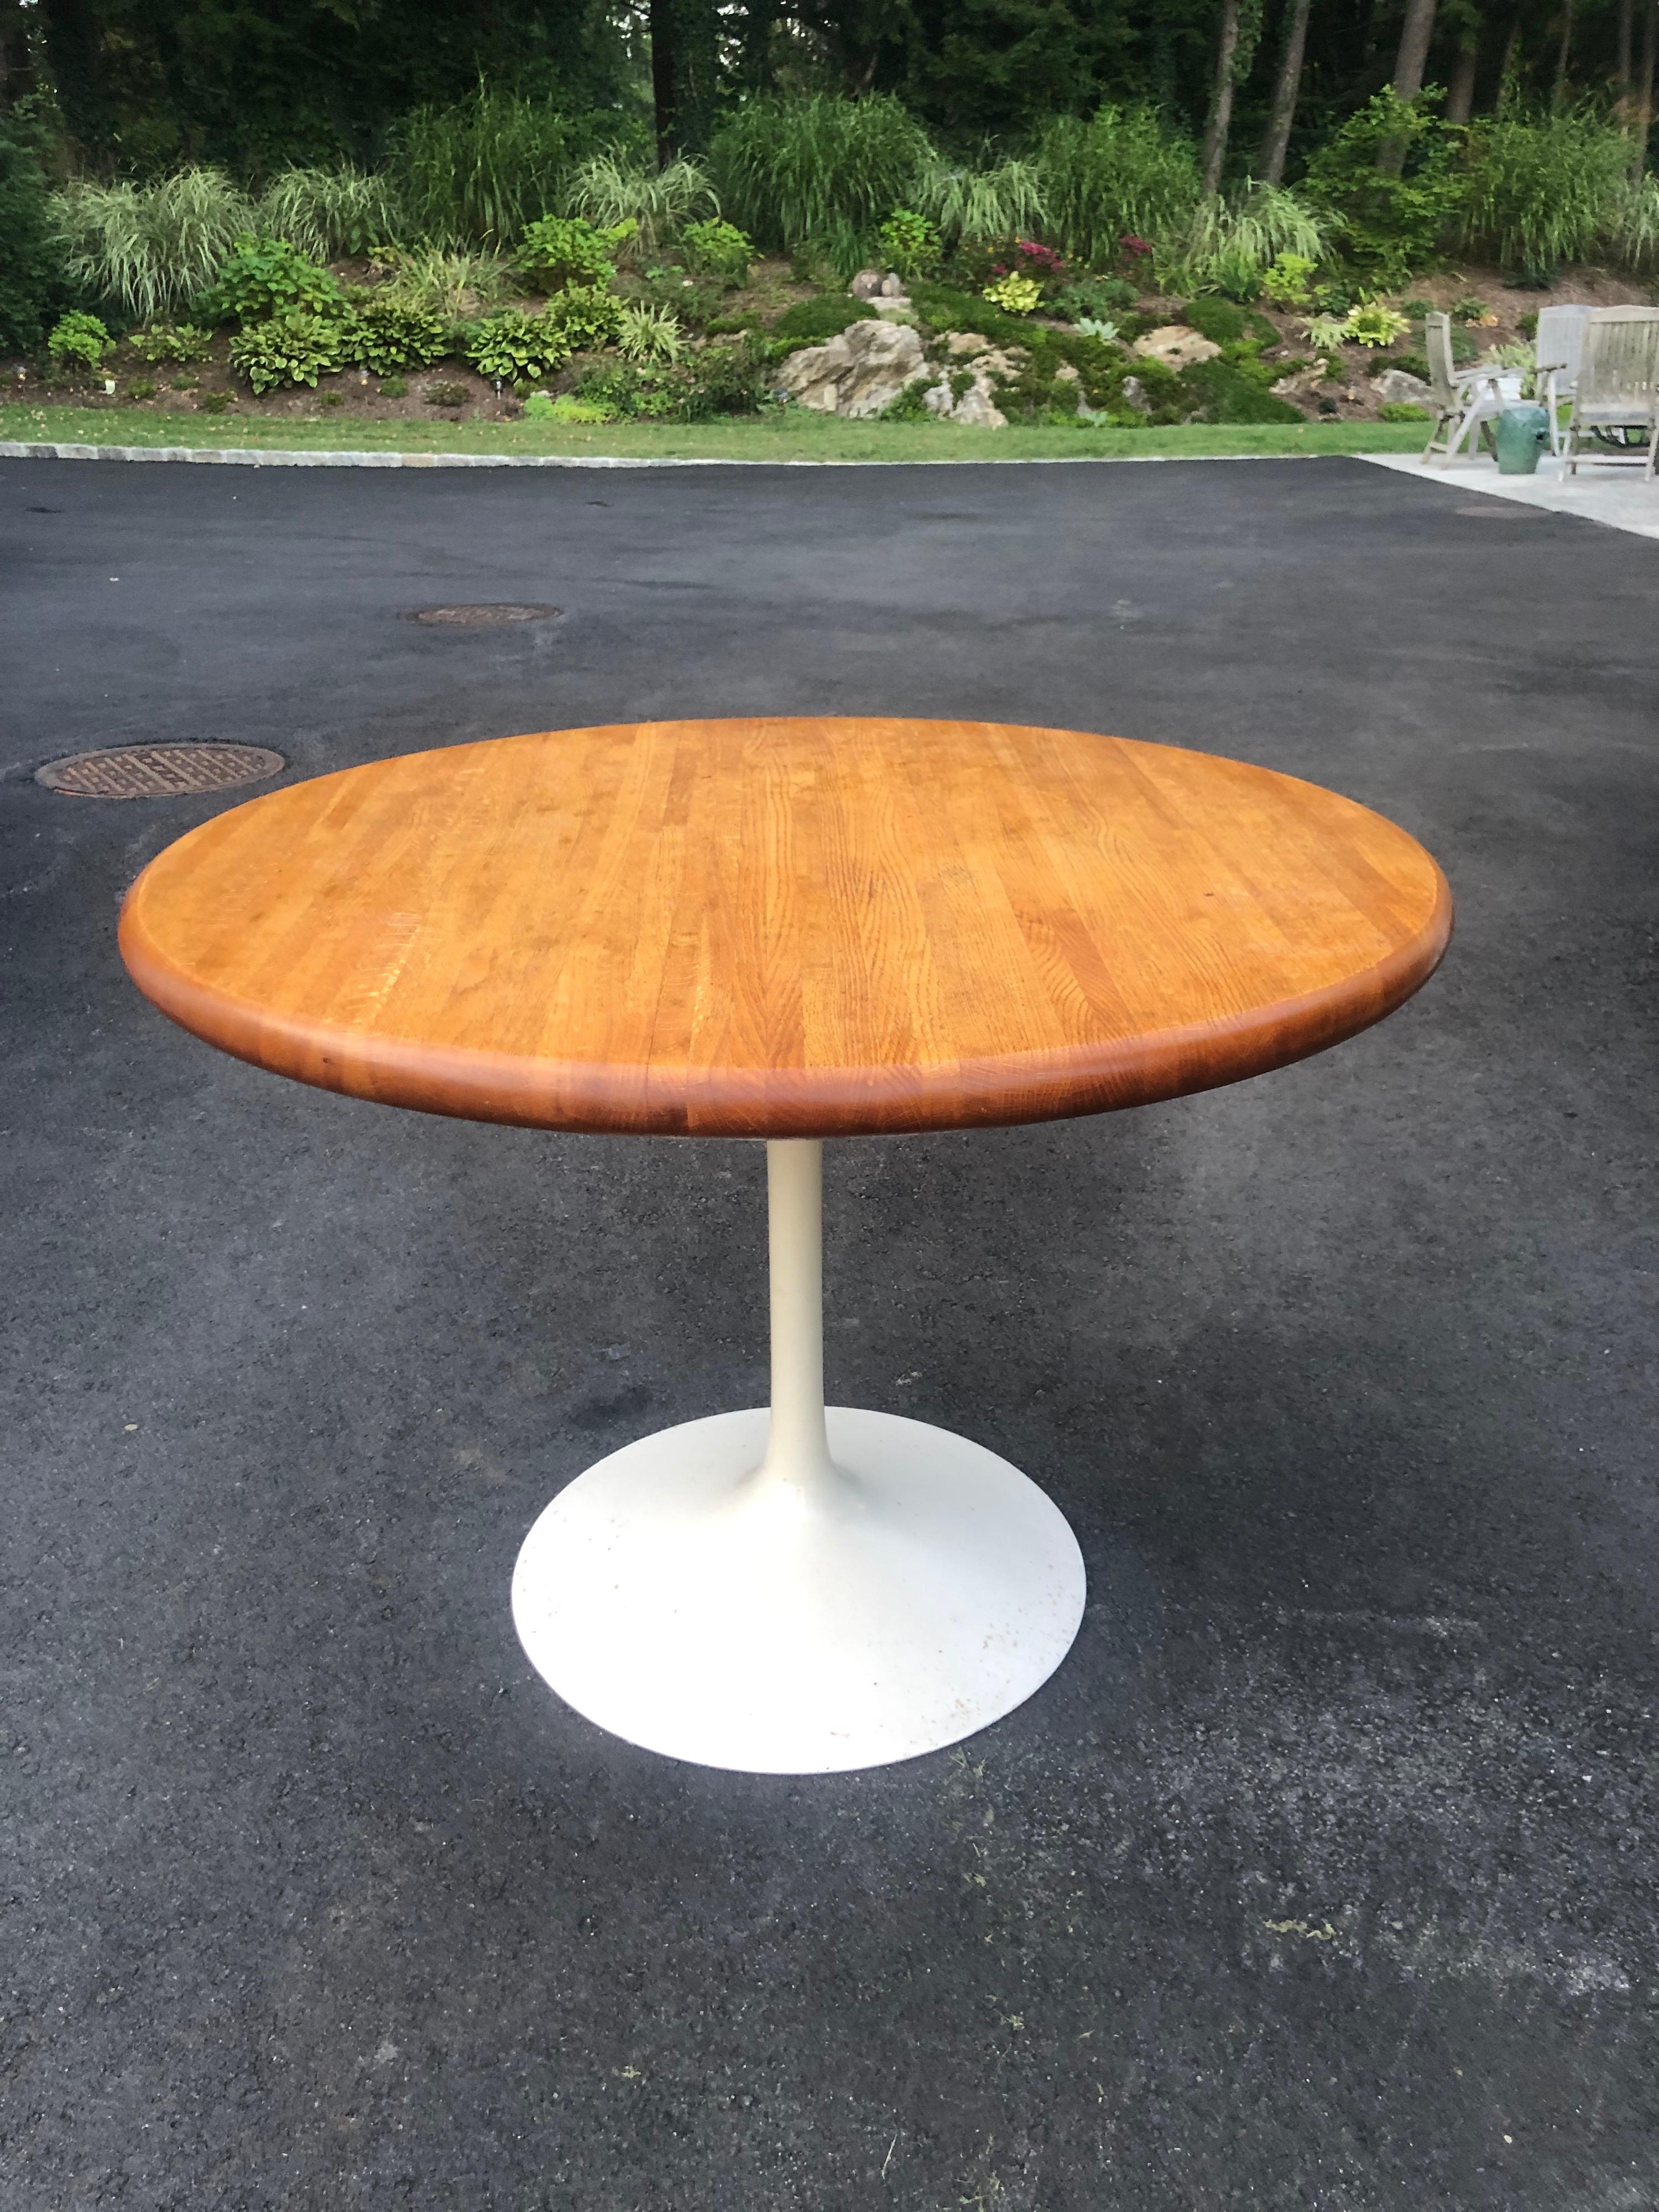 Mid-Century Modern Saarinen tulip table. This custom table has a thick Butcher block top. Perfect for that clean lines in a small kitchen space.